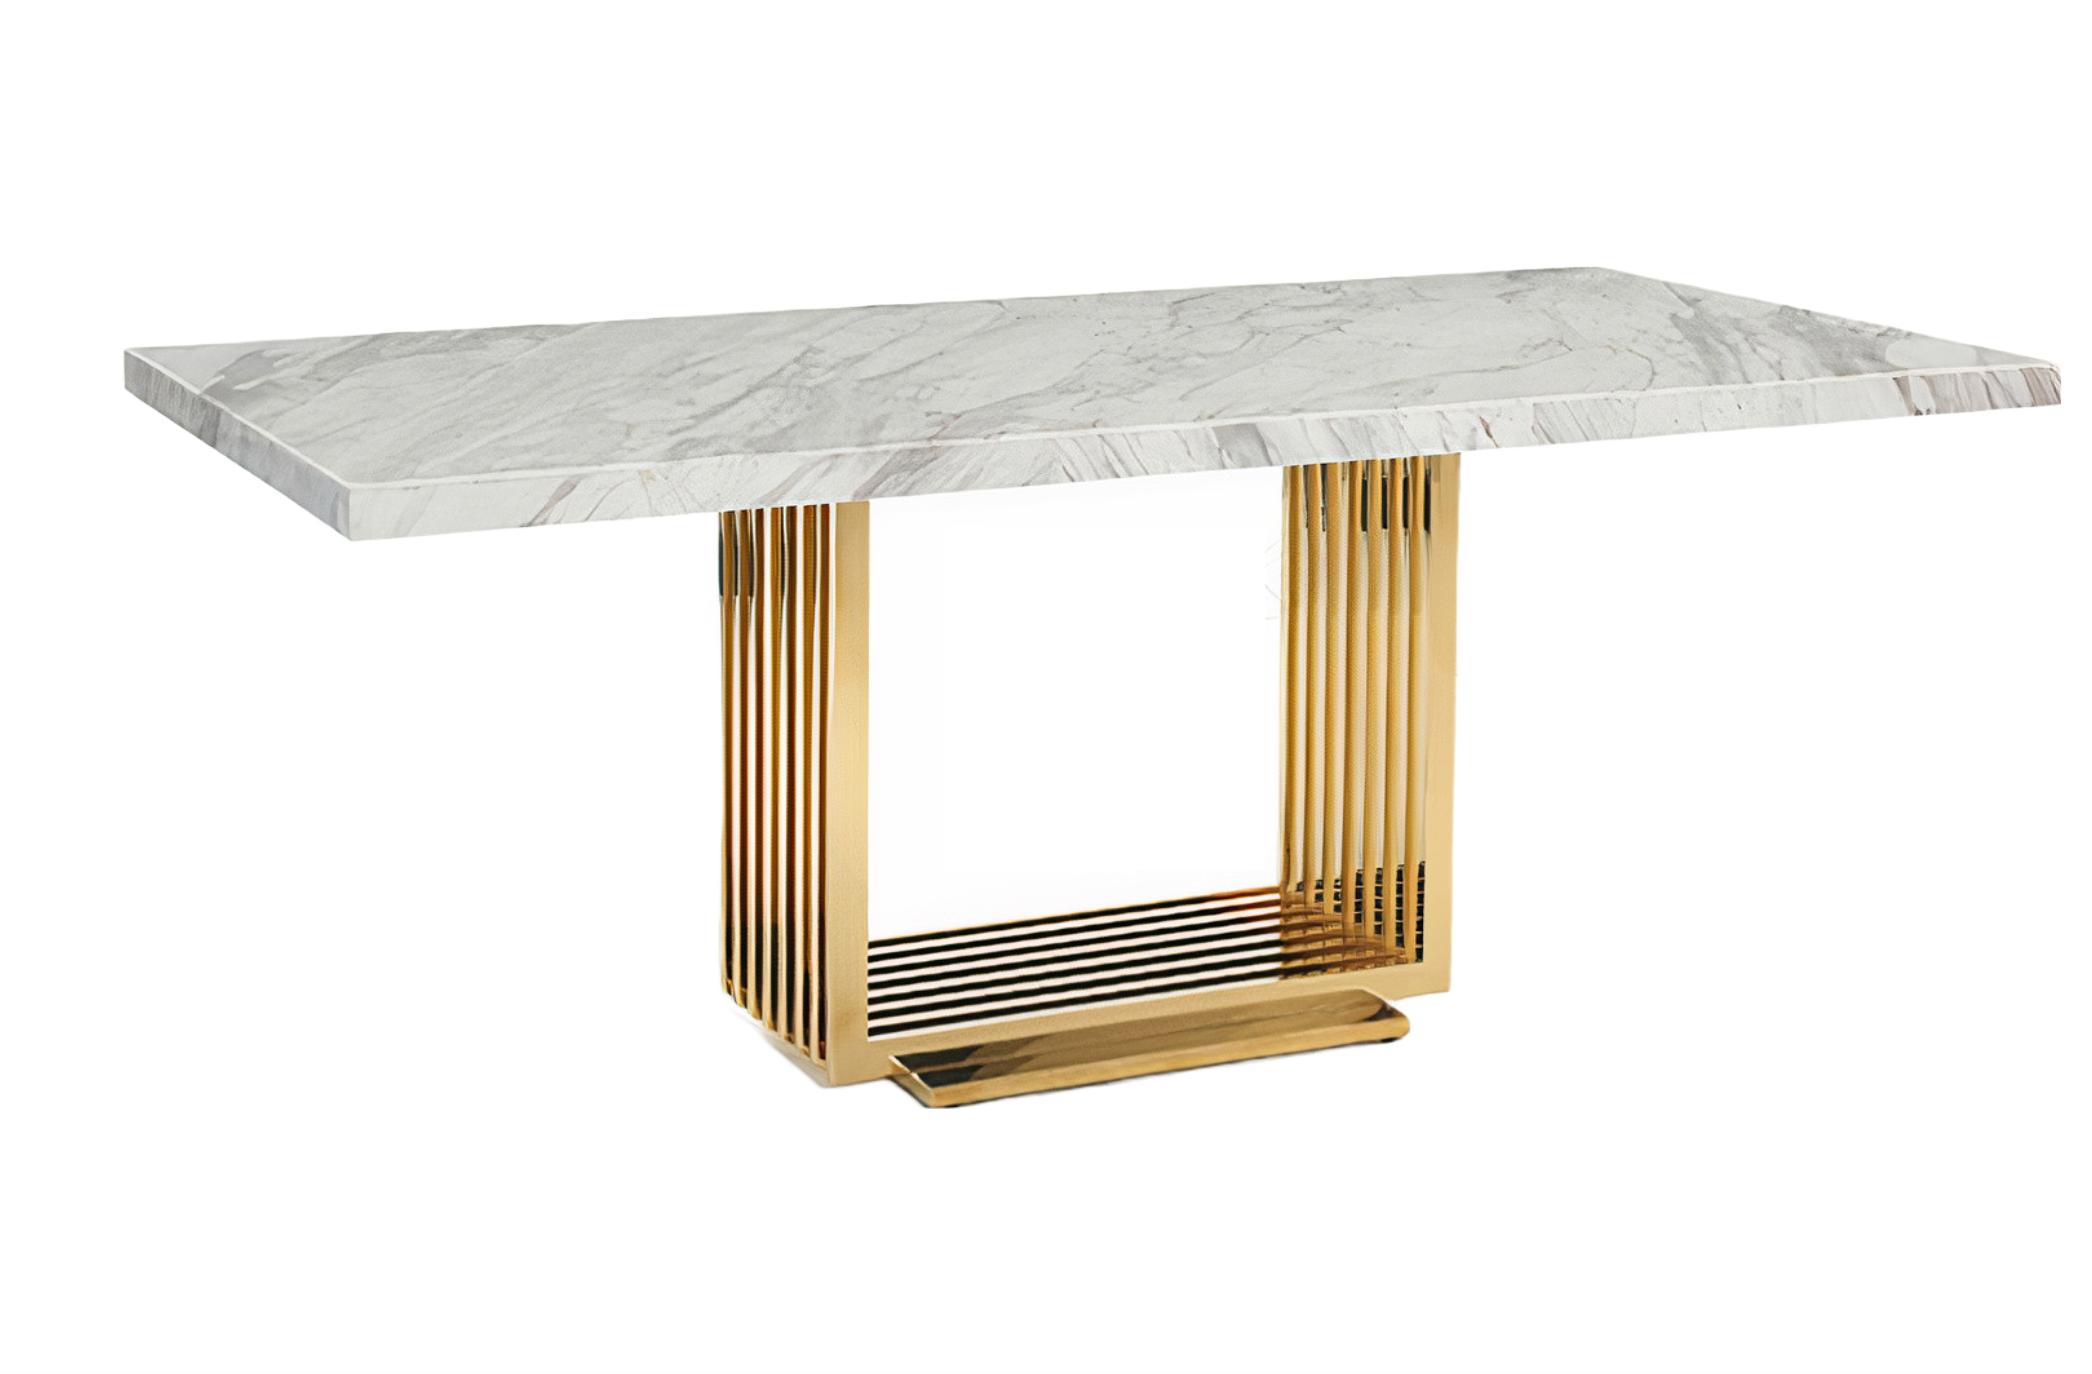 Modern Dining Table Kingsley VGVCT8933 in Gold, Black 